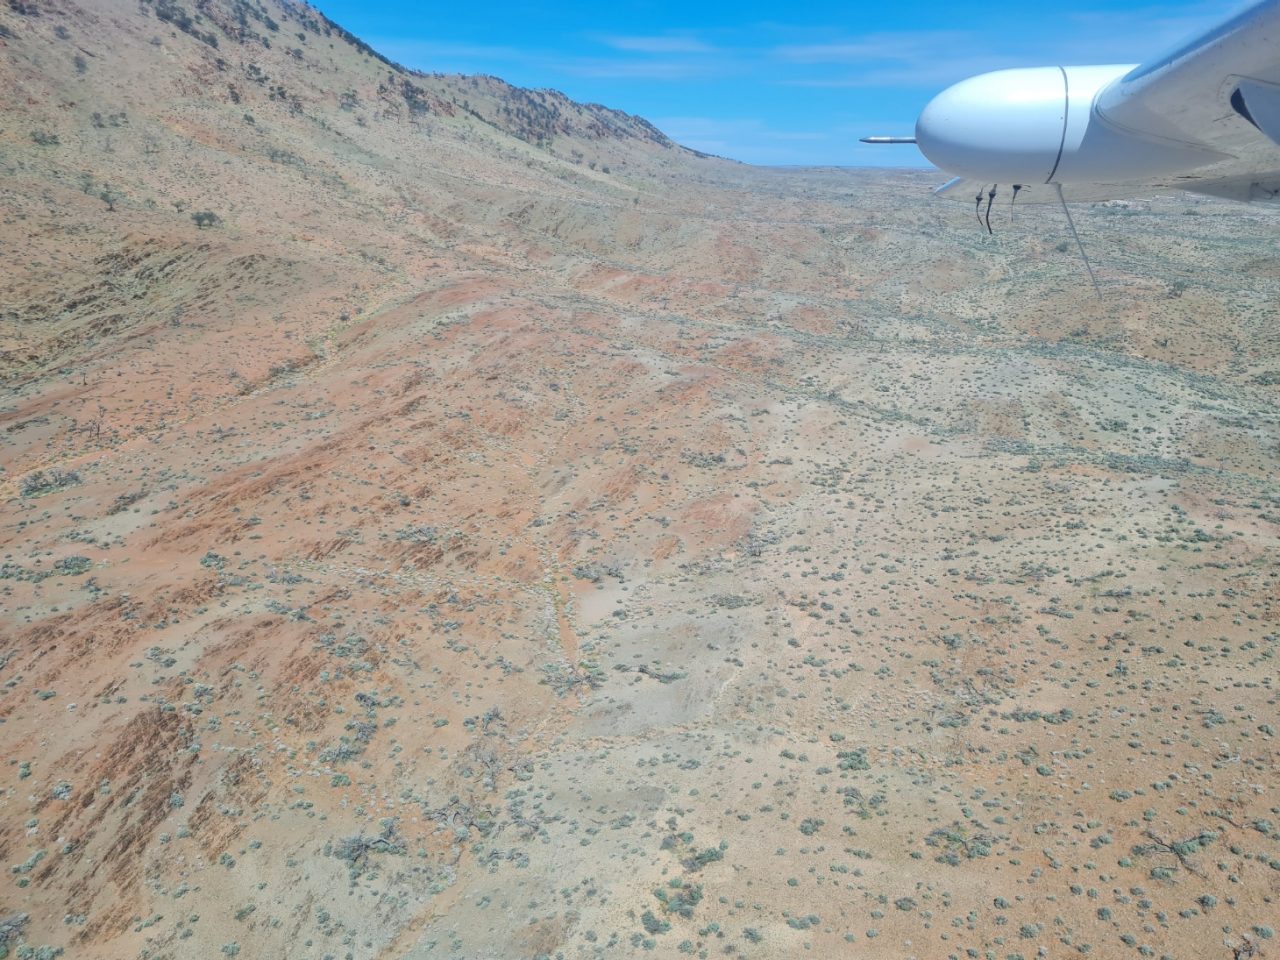 Aerial photo of plane wing passing a mountain protruding from the surrounding flat desert. Soil is orange and sparse vegetation covers the ground. 